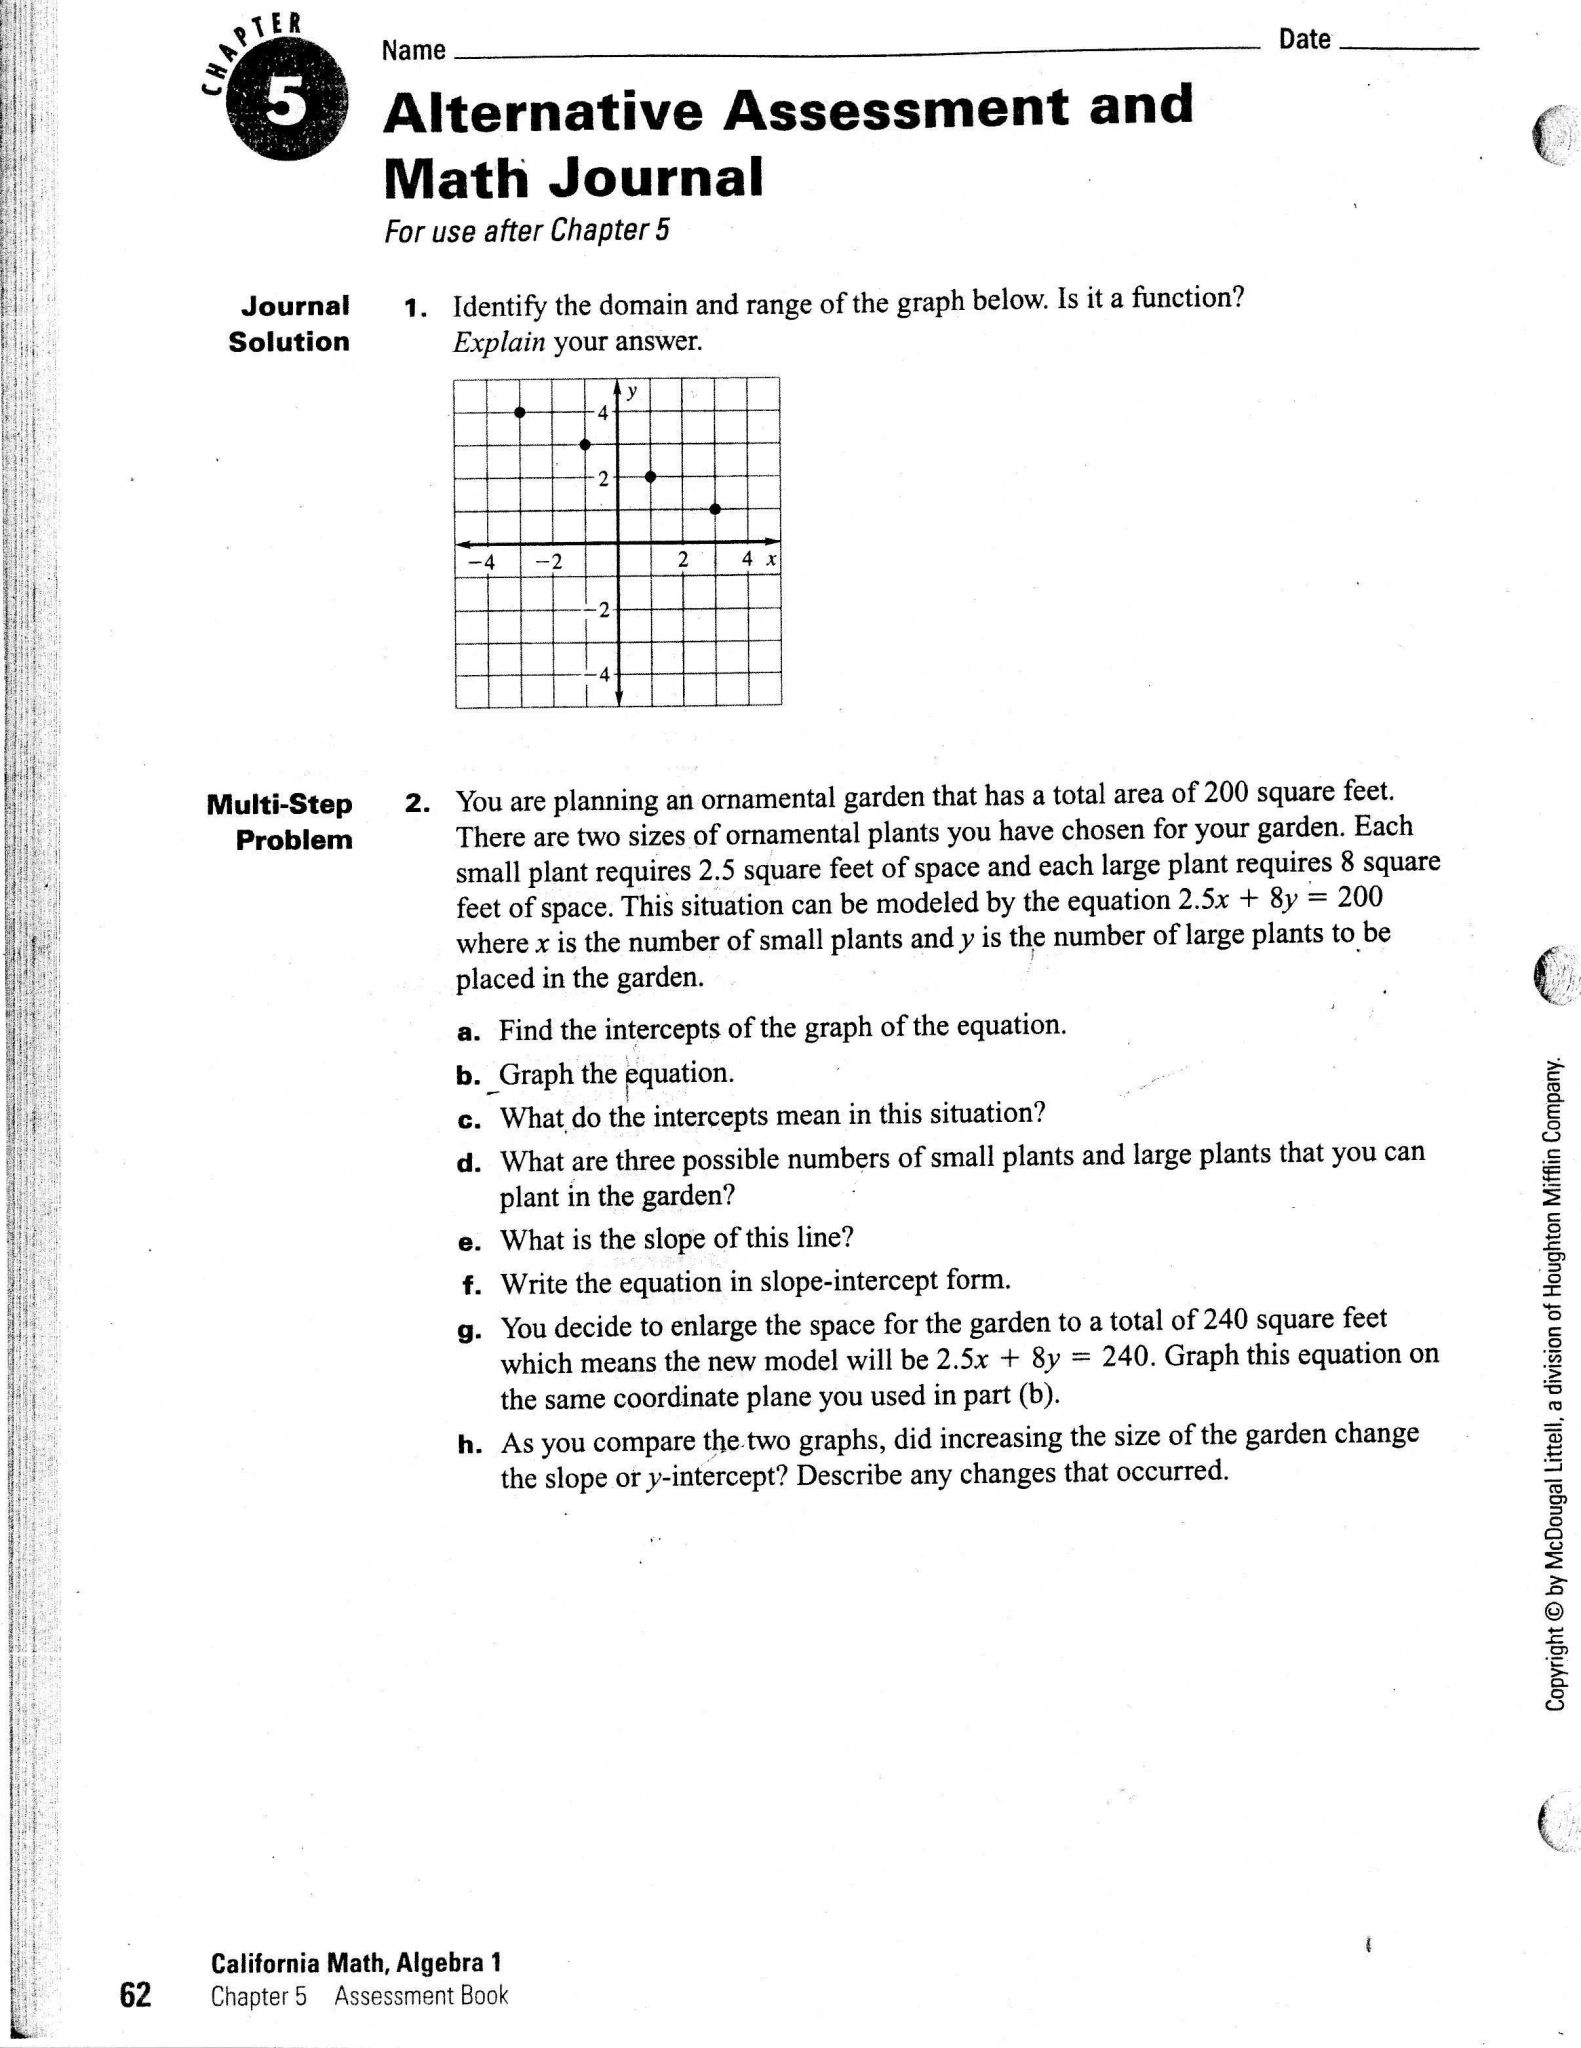 Domain and Range Worksheet Answers as Well as Word Equations Worksheet Answers Page 62 Fresh Western Center